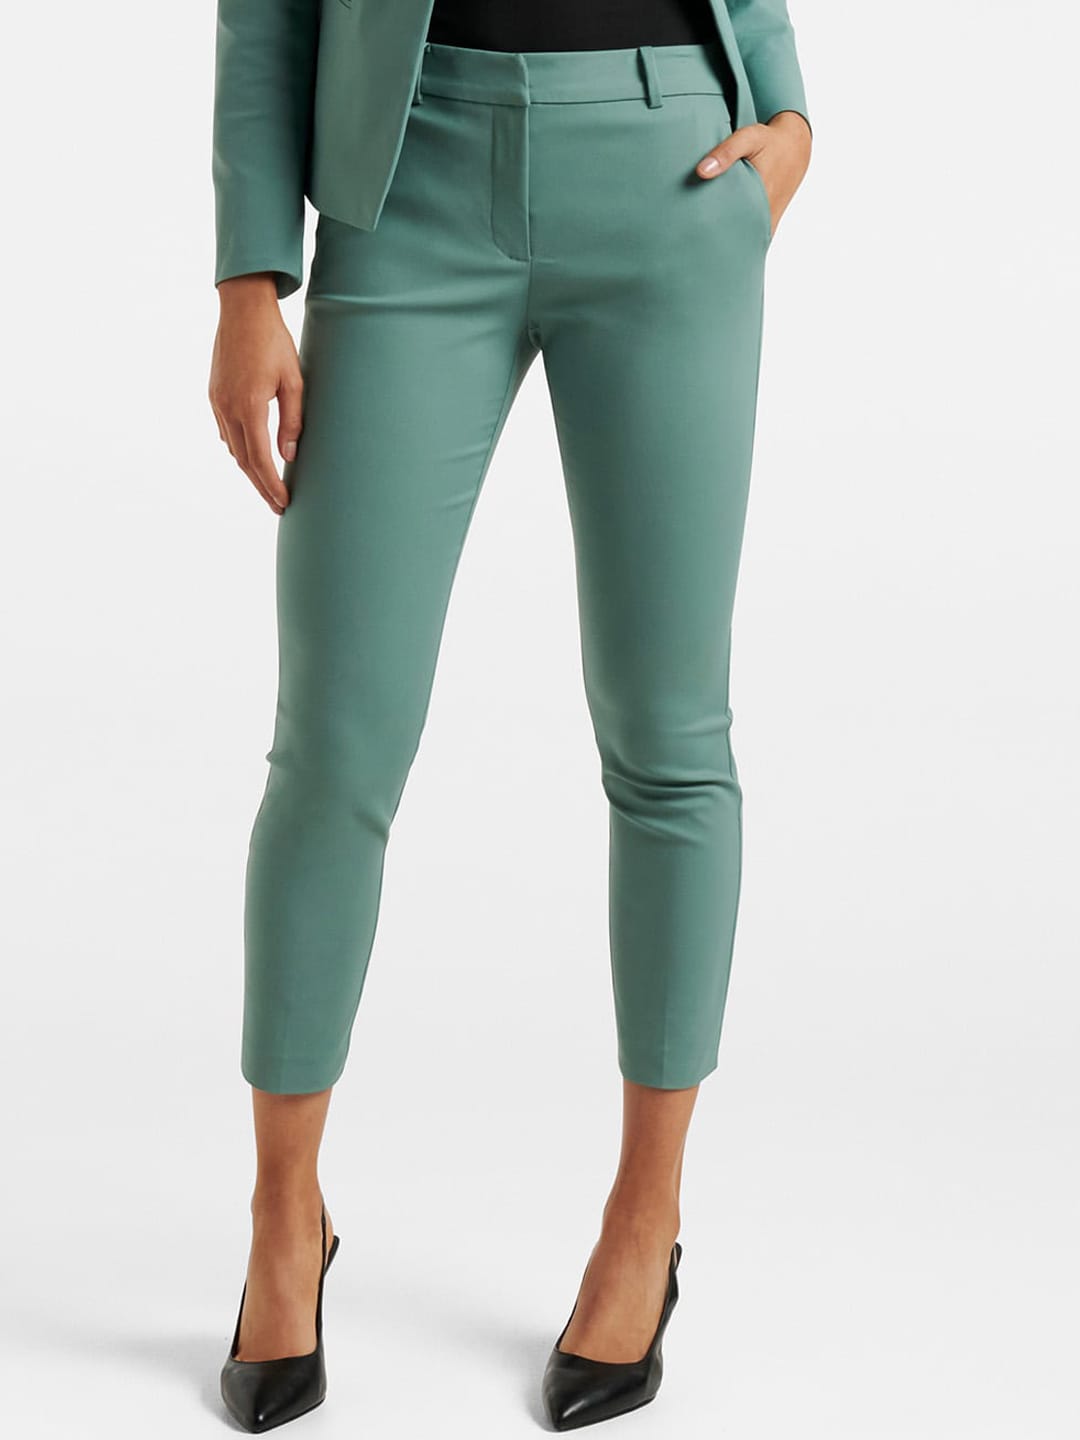 Forever New Women Pencil Slim Fit Trousers Price in India